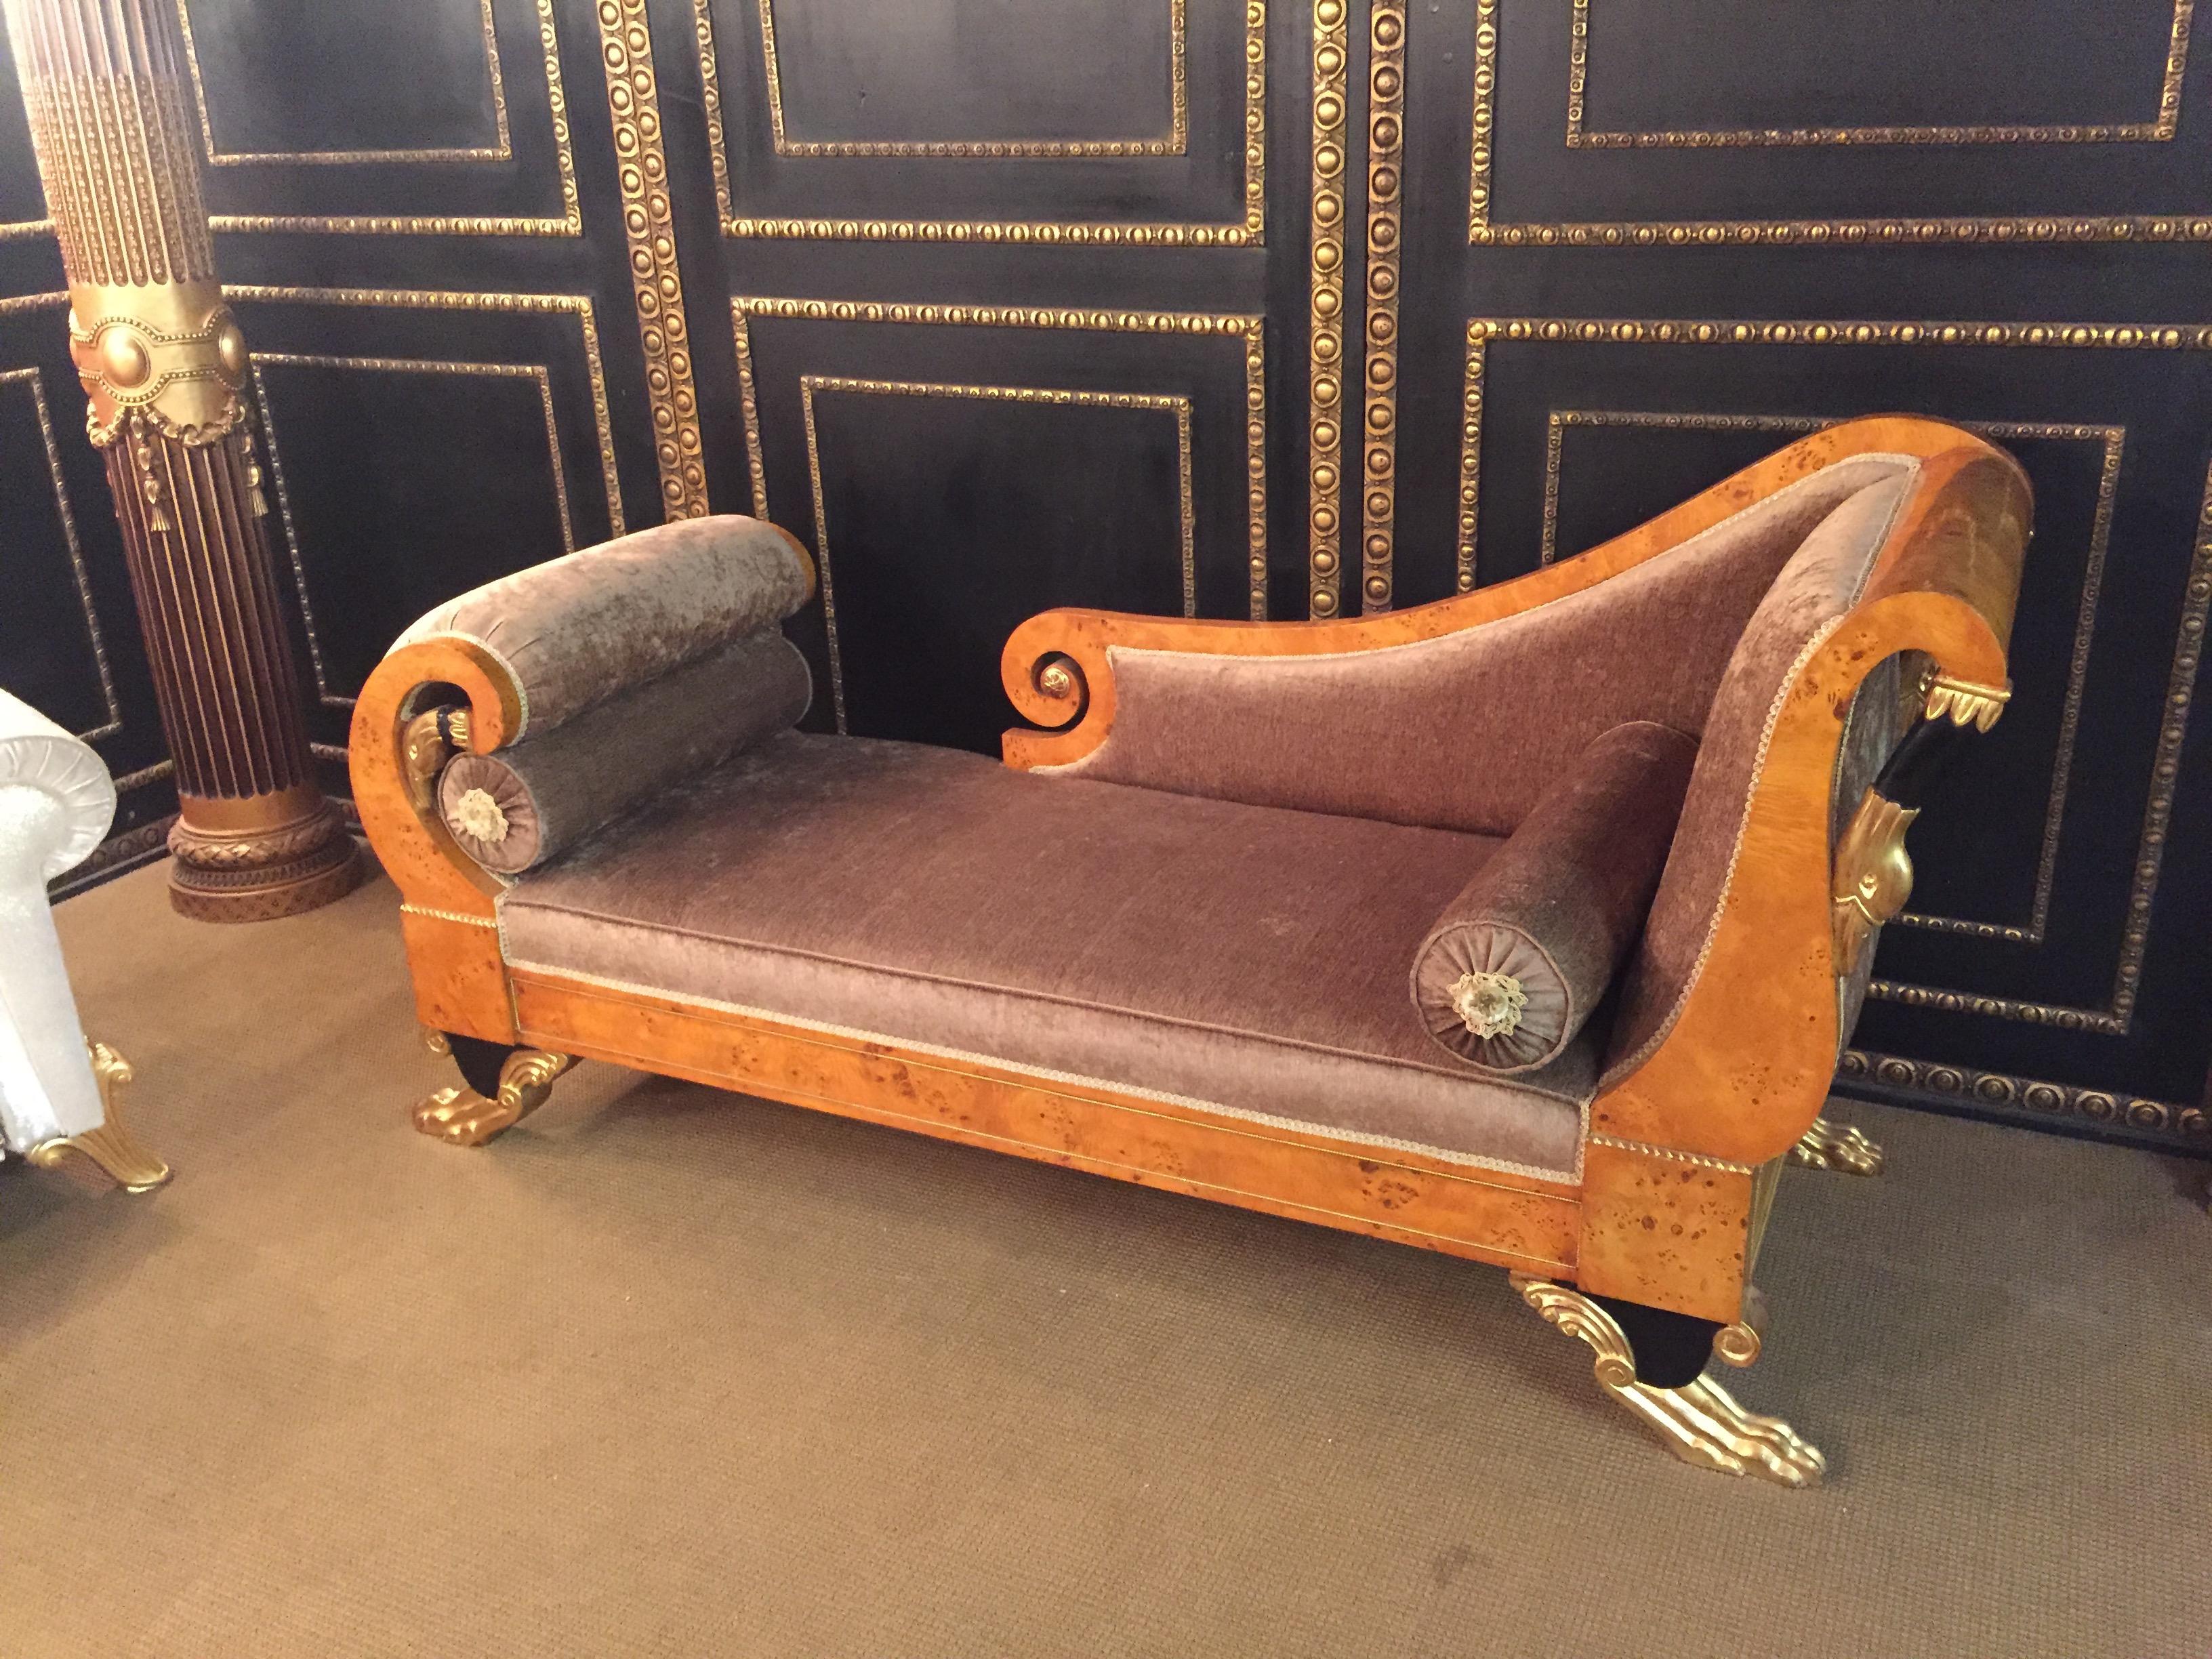 German 20th Century Antique Classizim Style Empire Swan Chaise Lounge Birdseye Maple For Sale